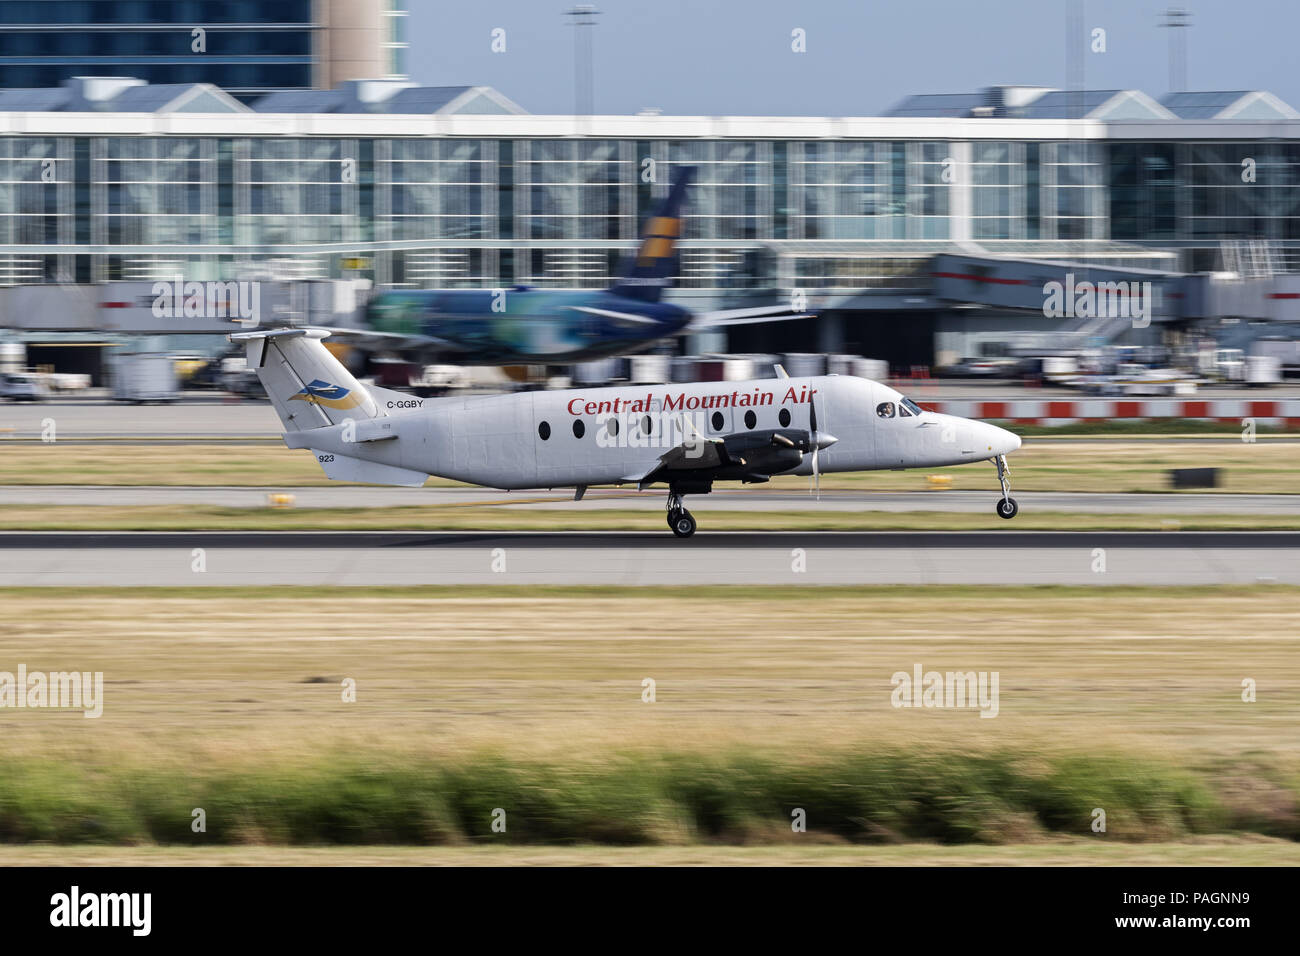 Richmond, British Columbia, Canada. 5th July, 2018. A Beech (Beechcraft) 1900D regional airliner (C-GGBY) belonging to the Canadian airline Central Mountain Air lands at Vancouver International Airport. Credit: Bayne Stanley/ZUMA Wire/Alamy Live News Stock Photo